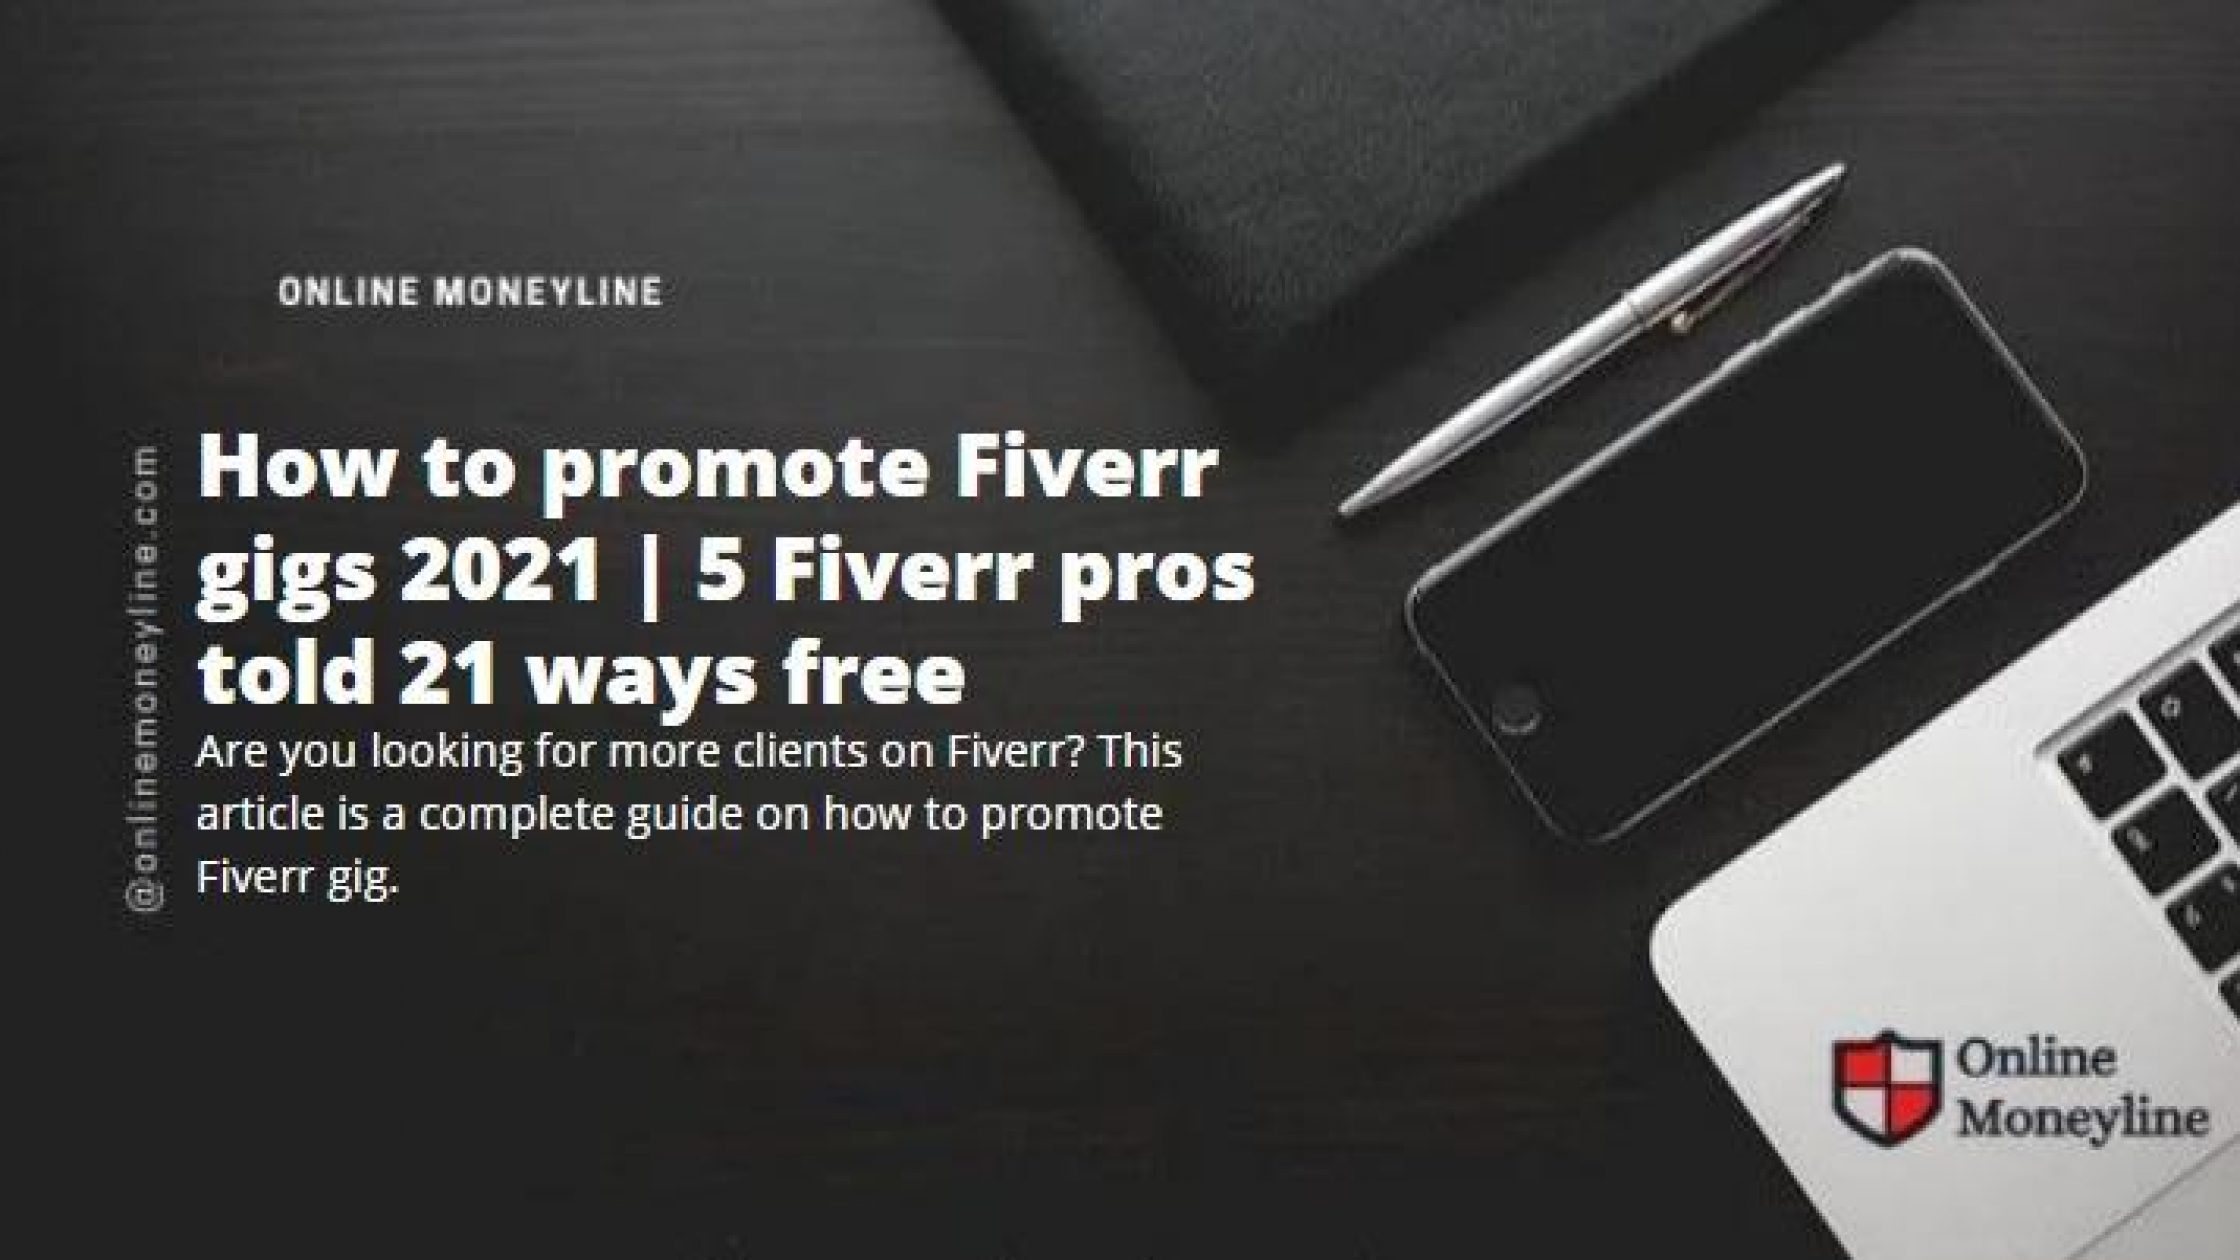 How to promote Fiverr gigs 2021 | 5 Fiverr pros told 21 ways free